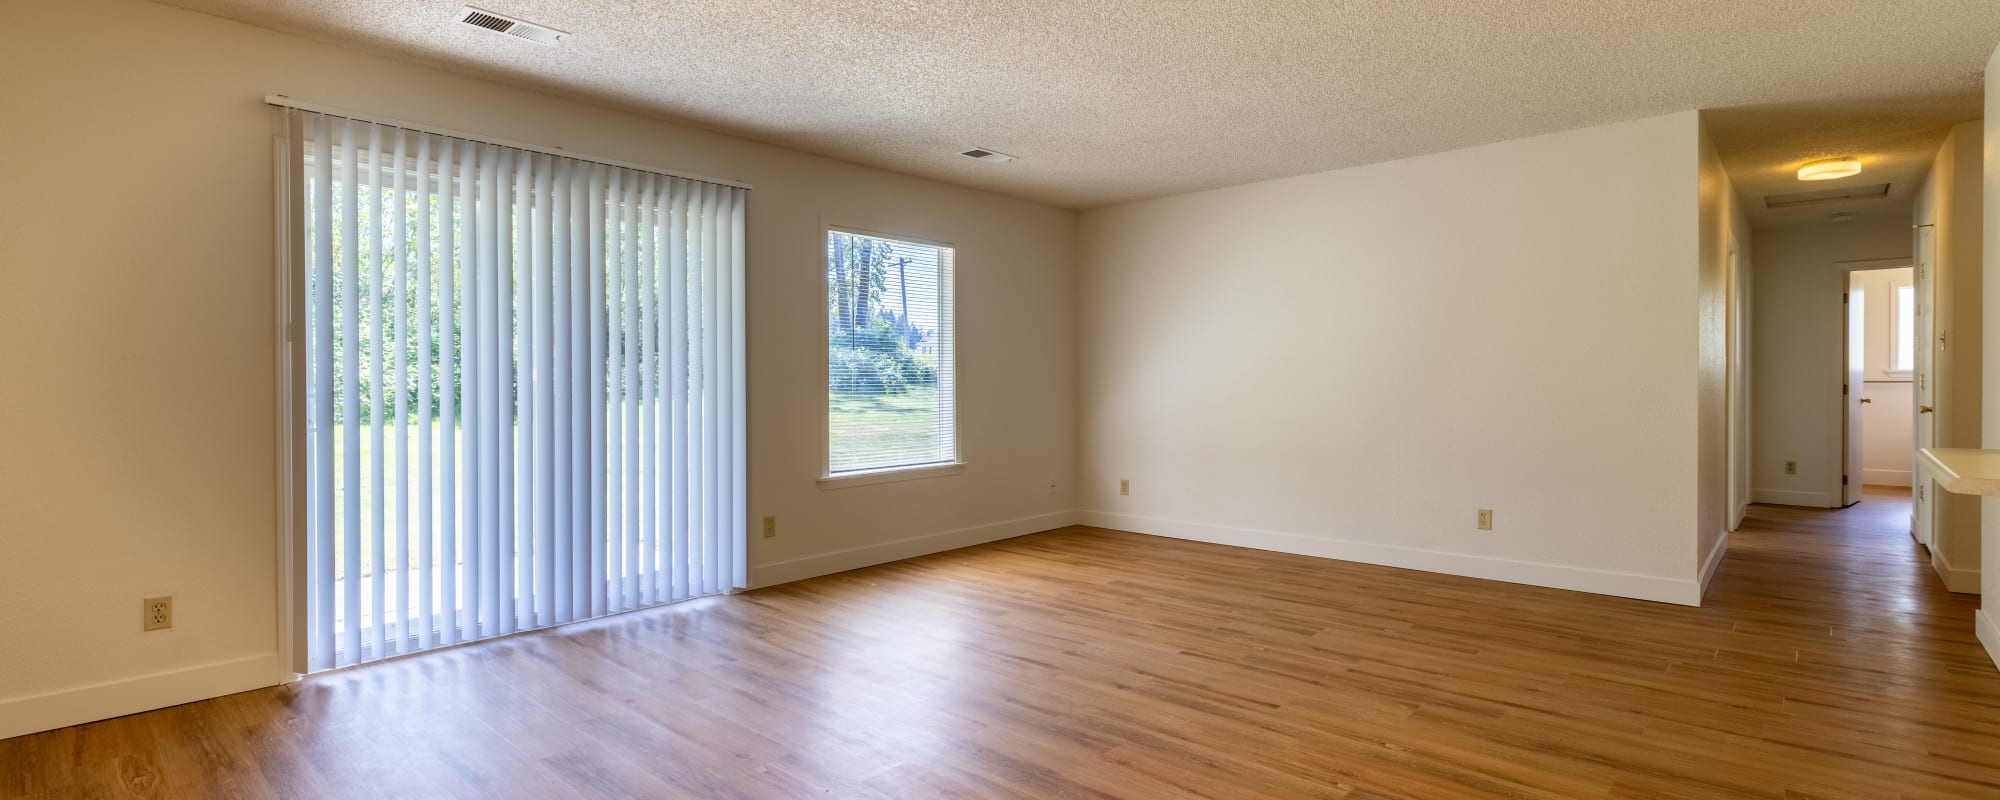 Open concept living room with access to backyard at New Hillside in Joint Base Lewis McChord, Washington